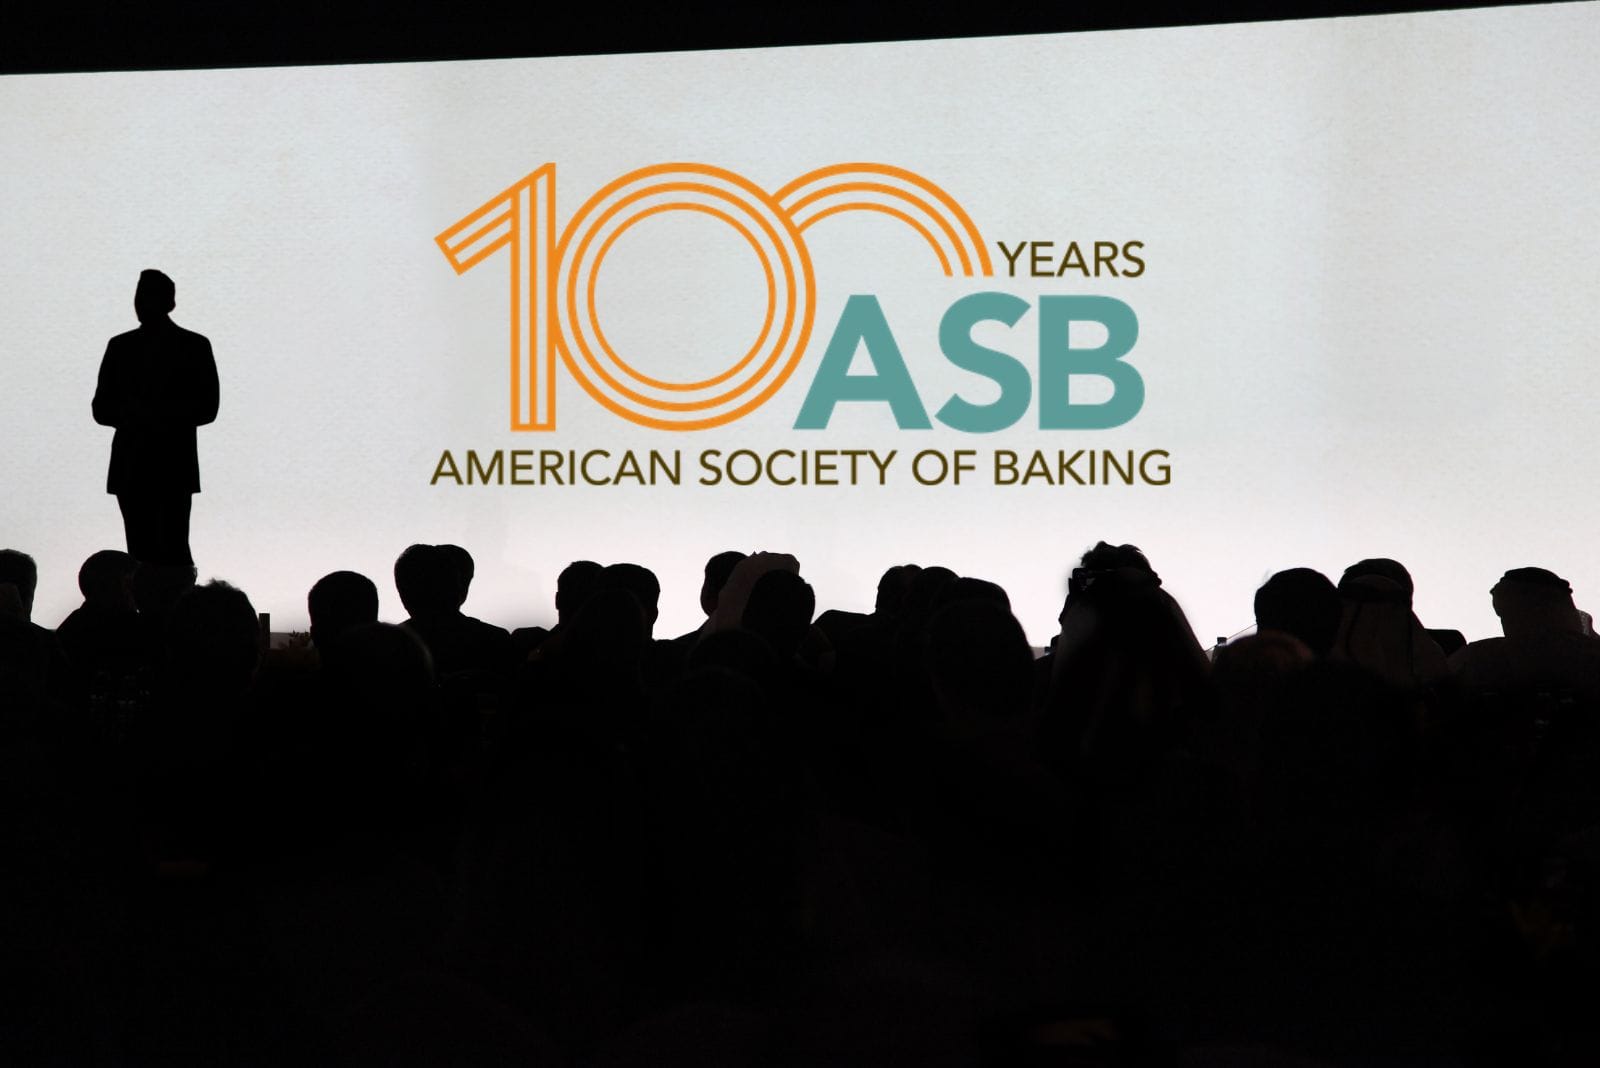 Shadows of a presentation with the American Society of Baking logo